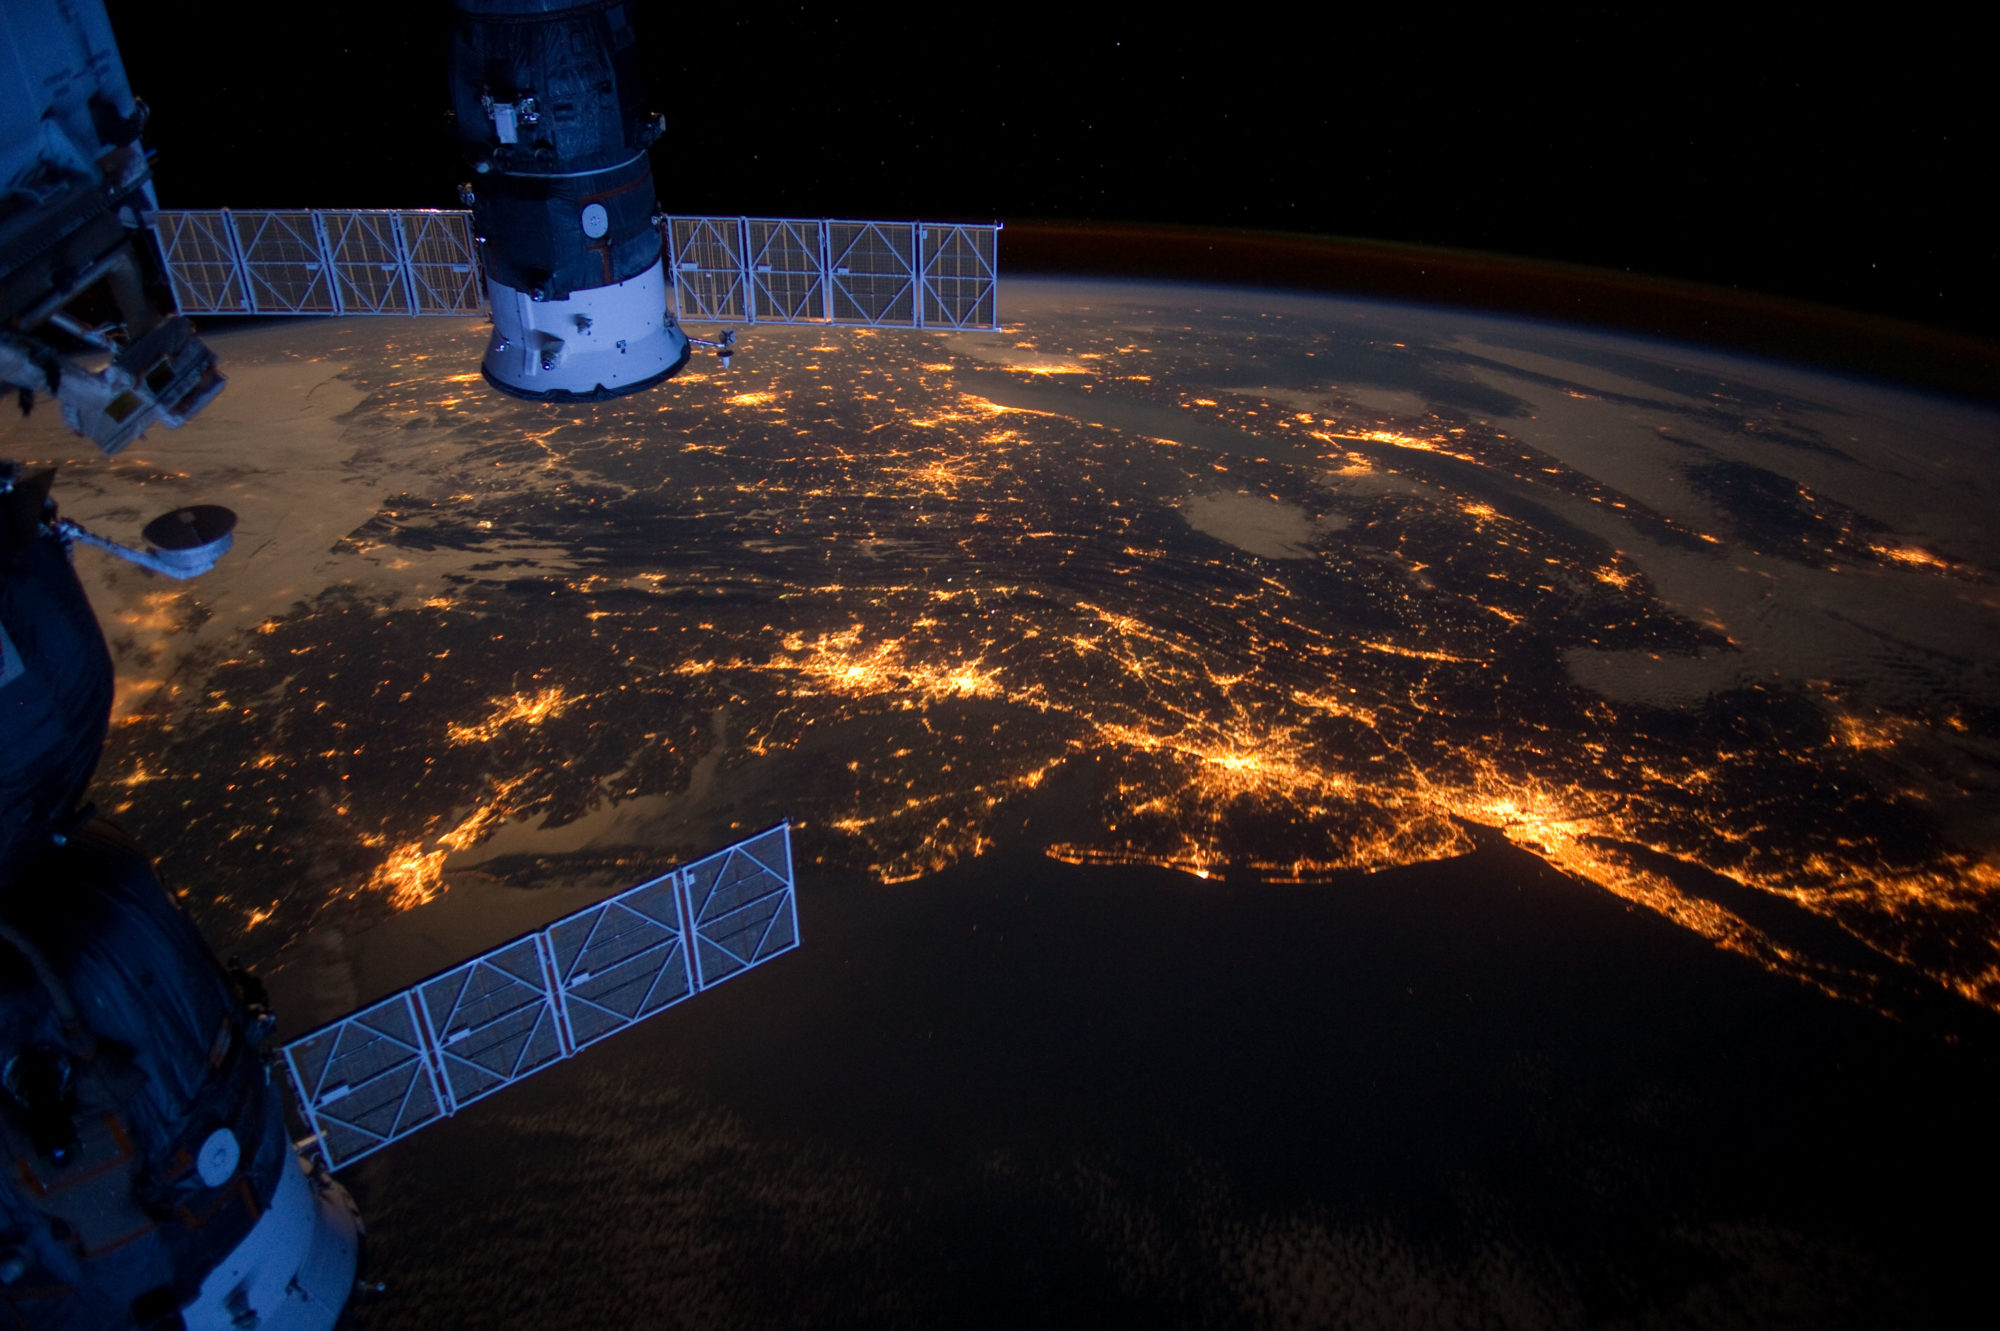 Sound Spotlight celebrates 50th anniversary of Earth Day with a photo taken the International Space Station from 6 feb 2012 show east coast United States at night. Long Island Sound can be seen in the right corner.